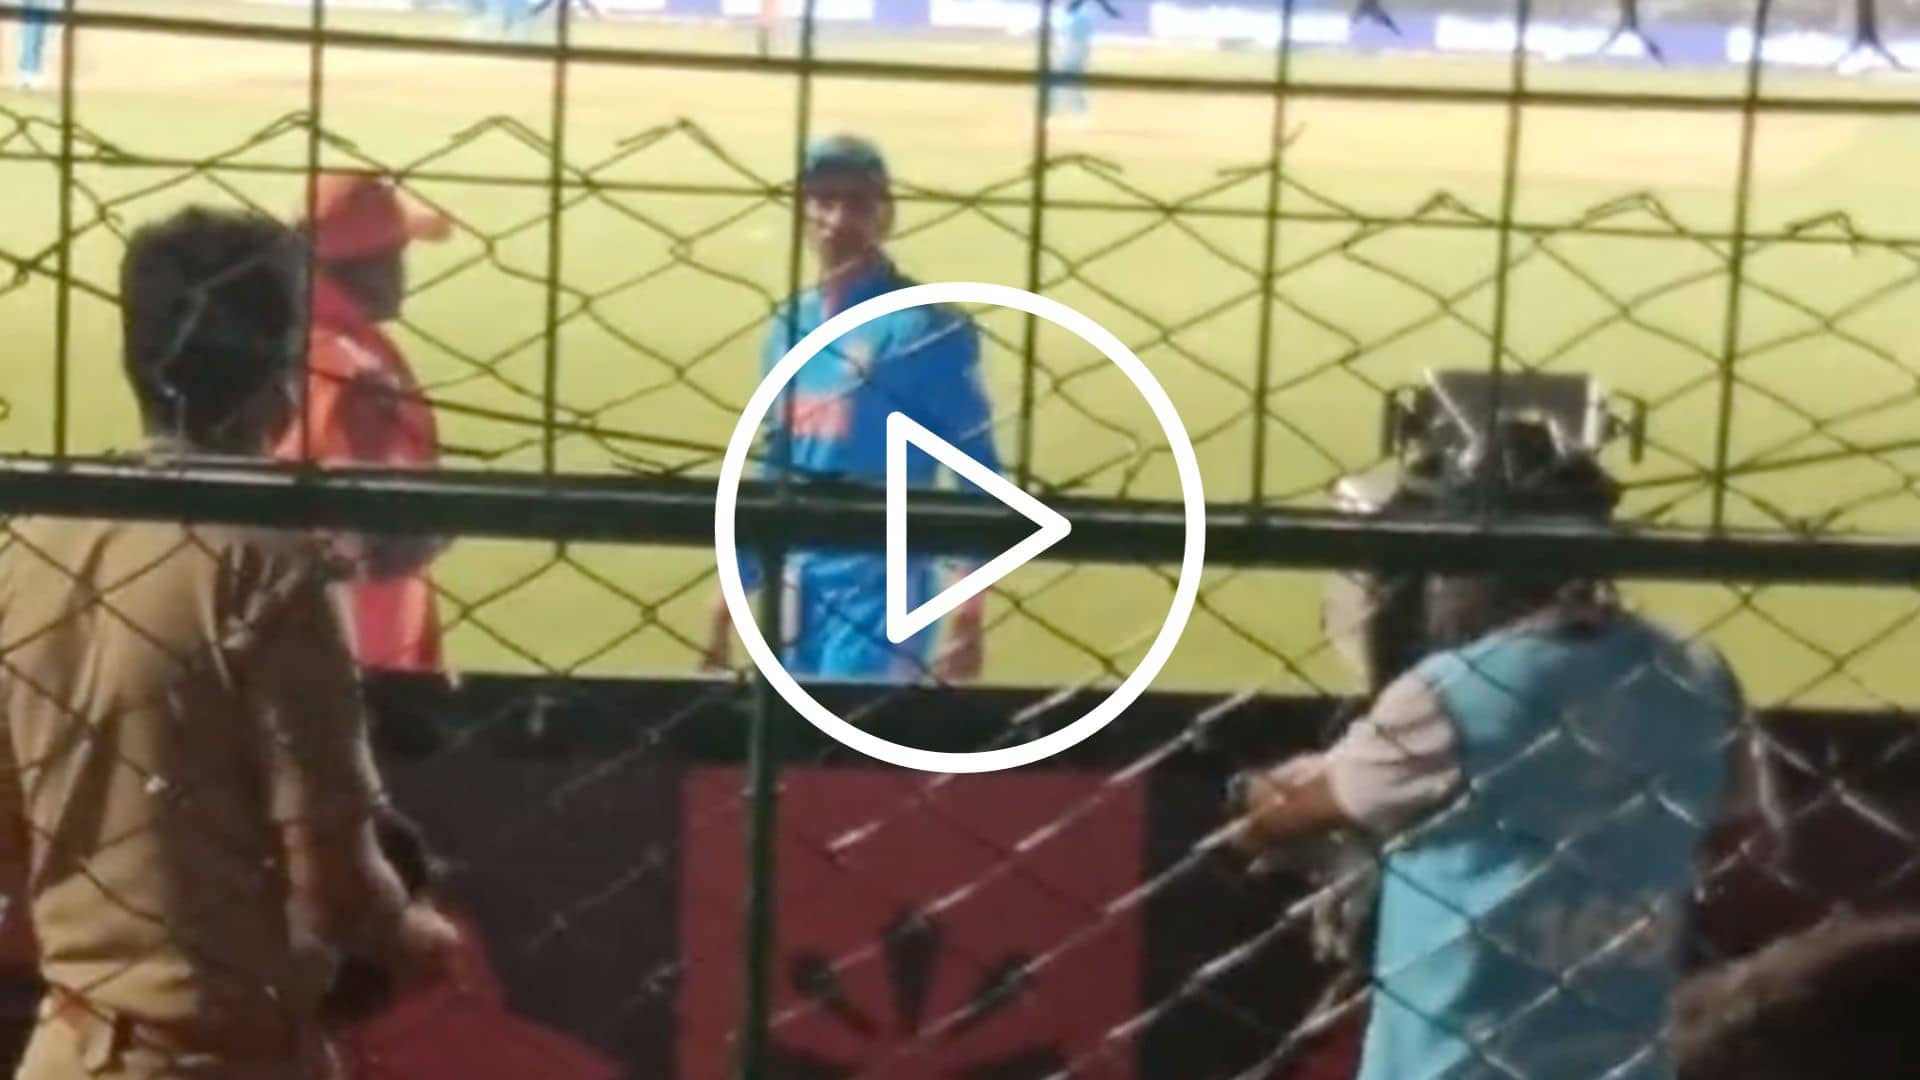 [Watch] Shreyas Iyer Gets Angry At Fans During IND-NED World Cup Match